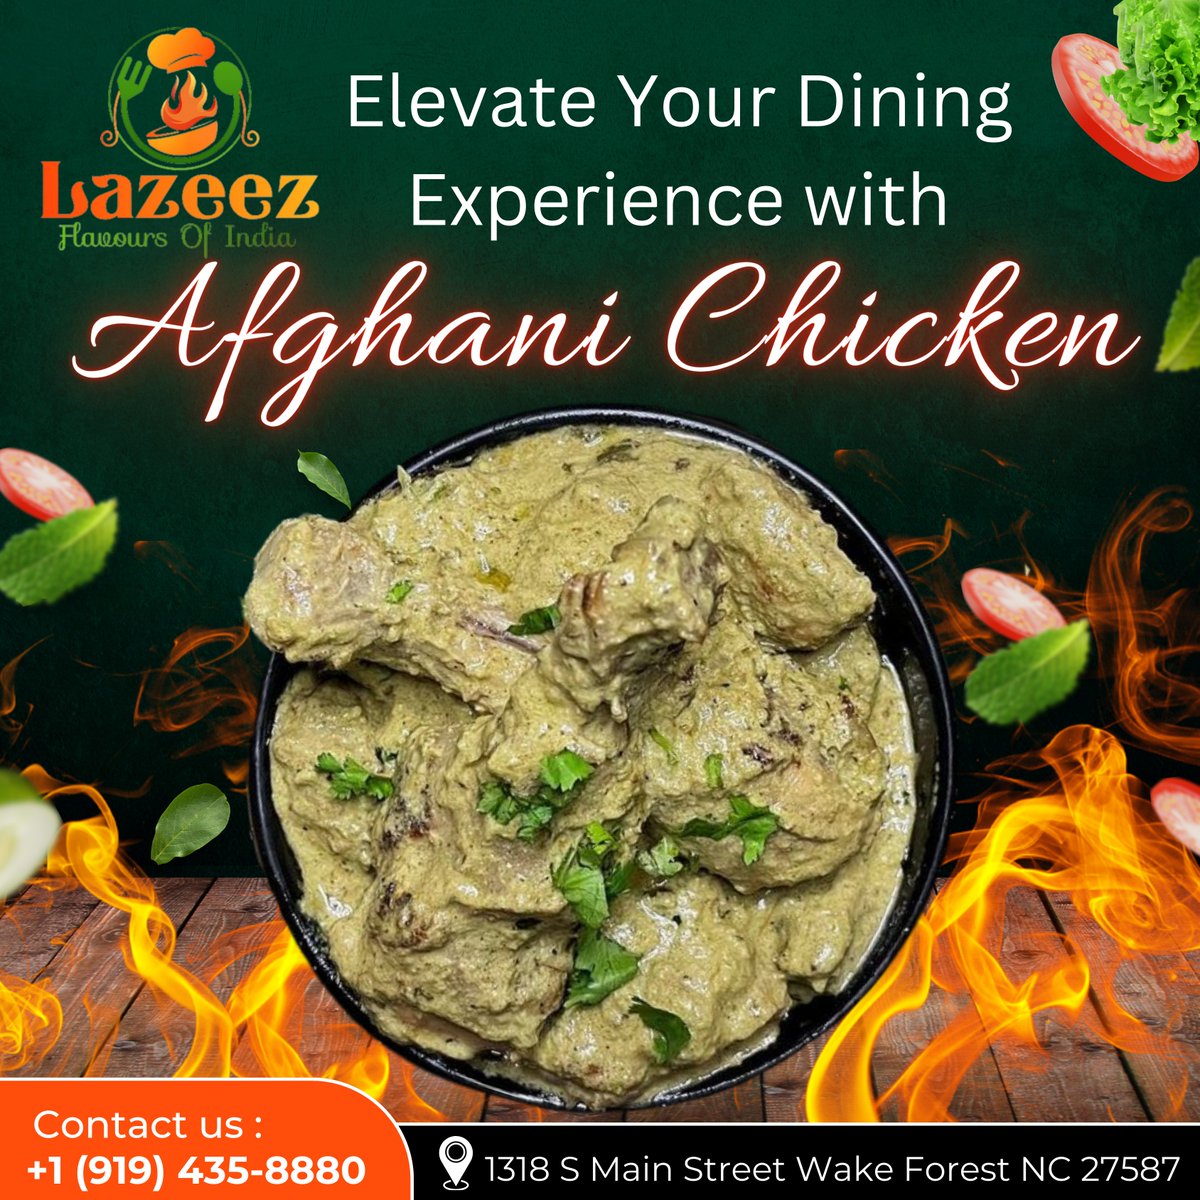 Join us at 𝐋𝐚𝐳𝐞𝐞𝐳 𝐅𝐥𝐚𝐯𝐨𝐮𝐫𝐬 𝐨𝐟 𝐈𝐧𝐝𝐢𝐚!🍽️ and let the delectable journey unfold. The succulence of Afghani Chicken awaits your discerning taste.

Call to place your order🤙: +1 (919) 435-8880
🌐 lazeeznc.com

#AuthenticFlavors  #FoodinRTP